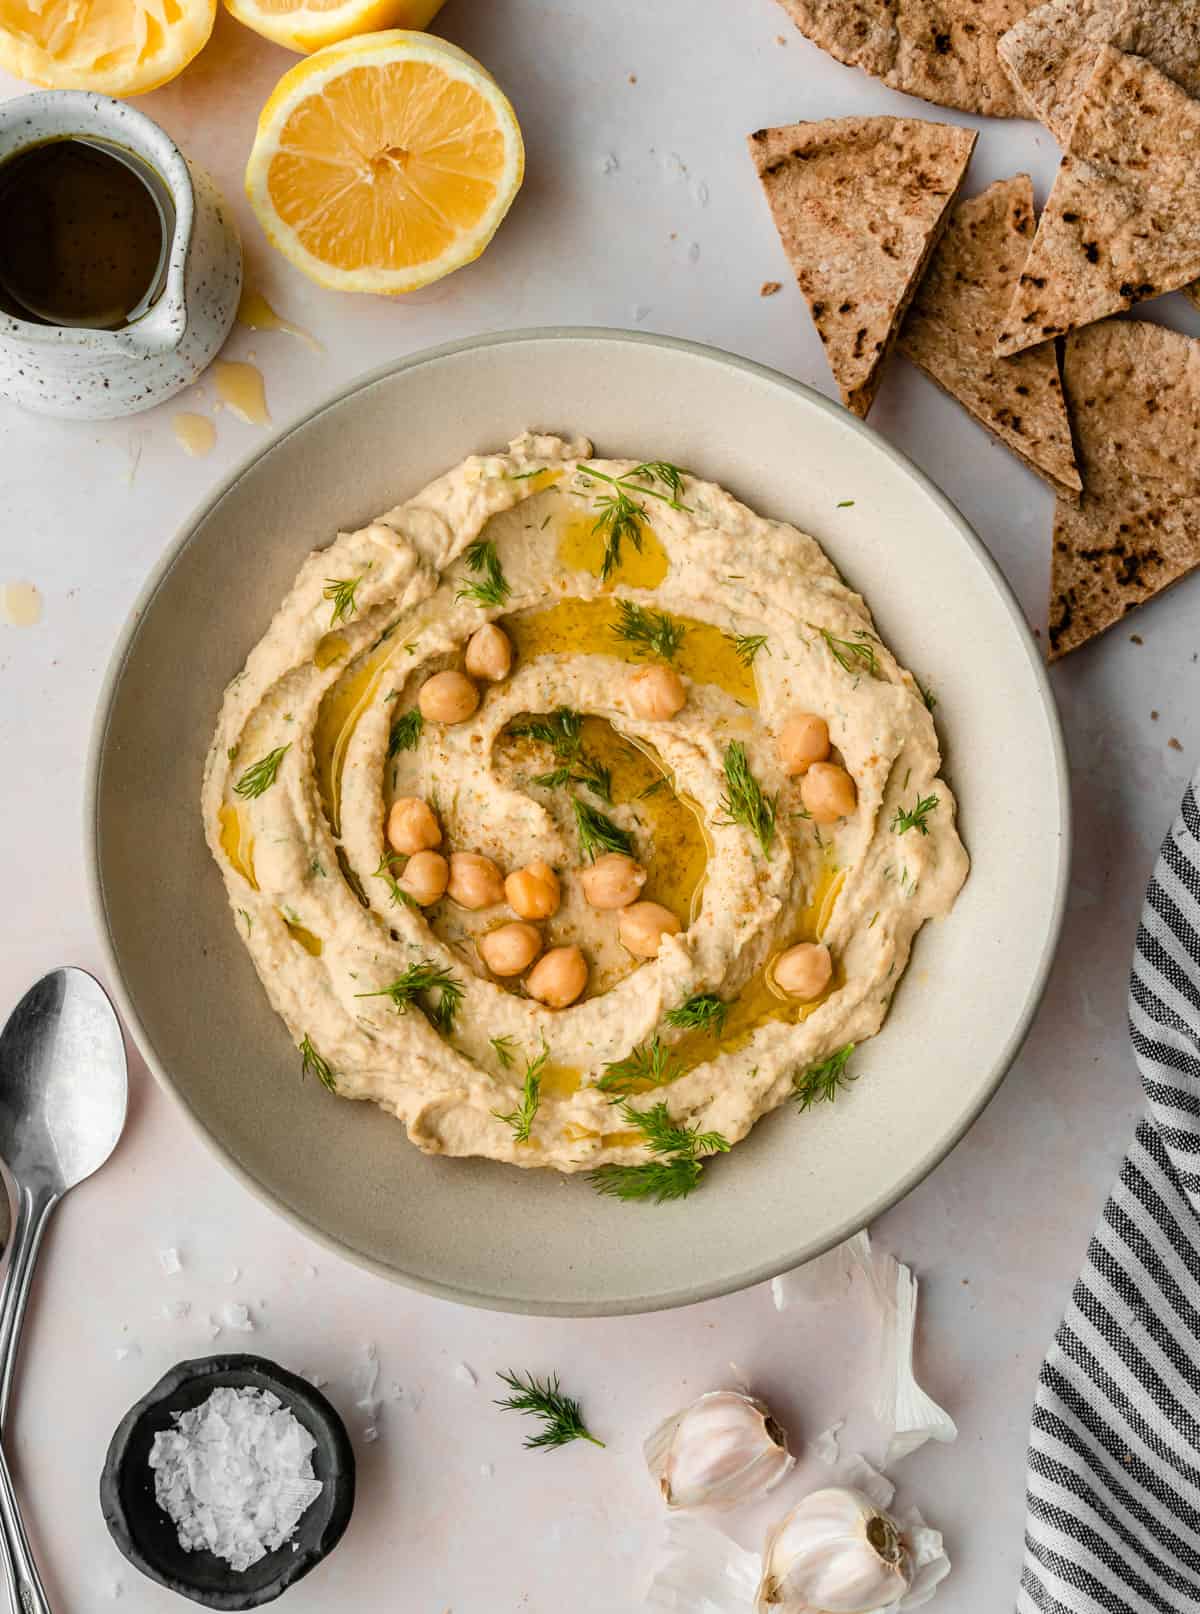 Lemon dill hummus garnished with fresh dill, whole chickpeas and chips around the bowl. 